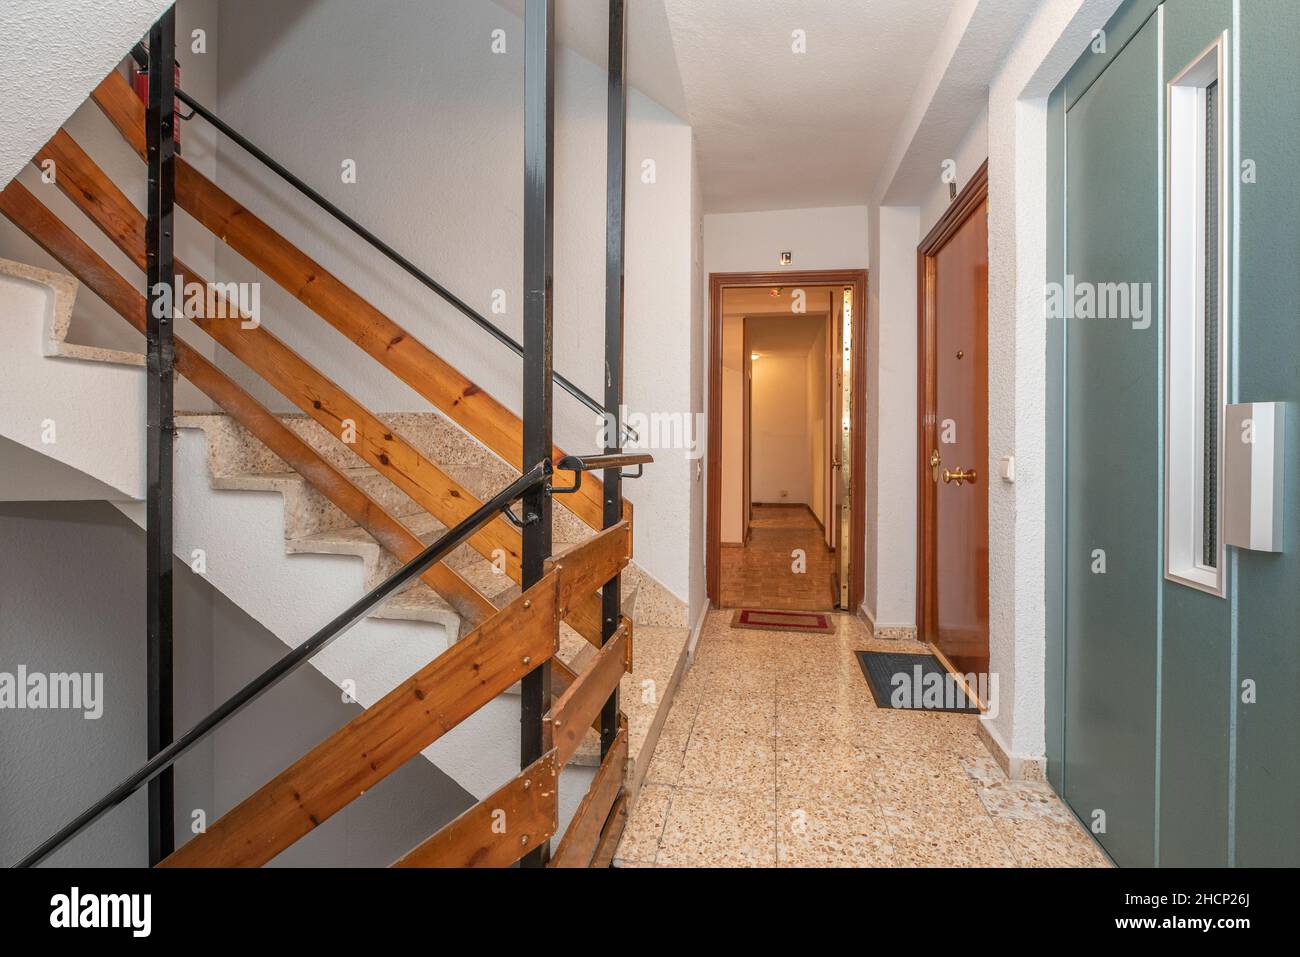 Stairs of residential apartment building with elevator and stone tile flooring Stock Photo